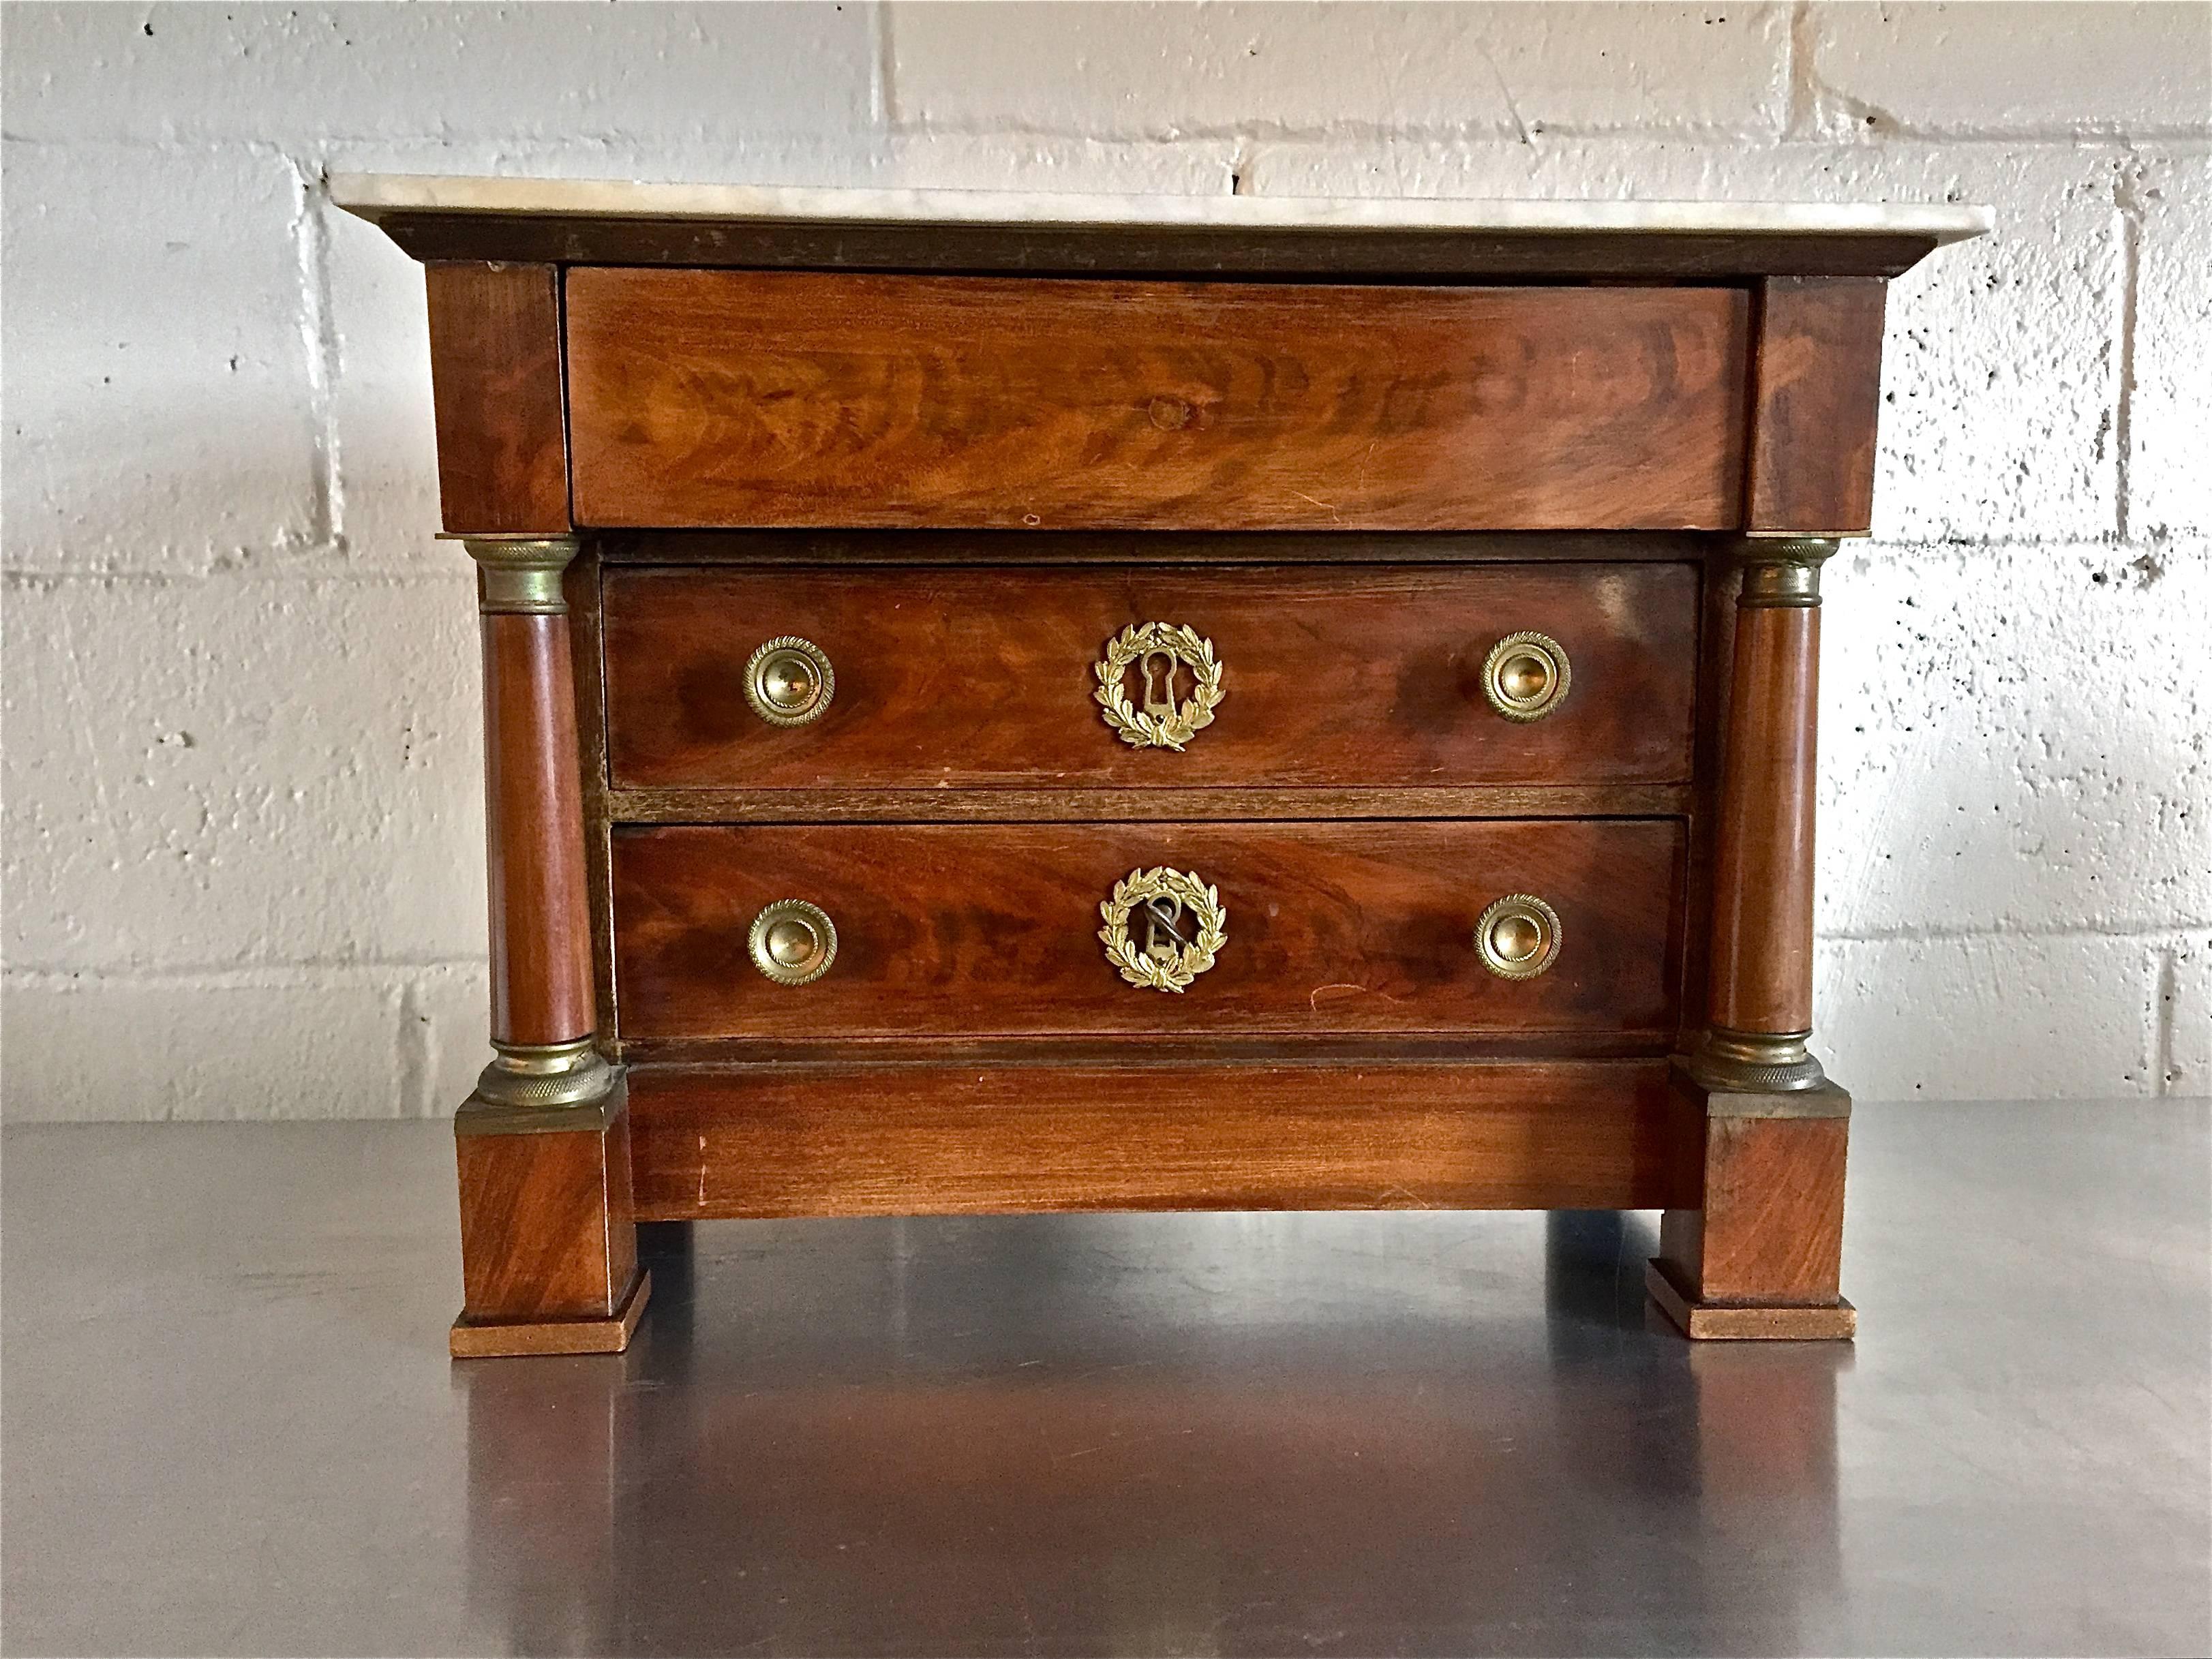 19th Century French Empire Miniature Commode Chest In Good Condition For Sale In Lake Success, NY